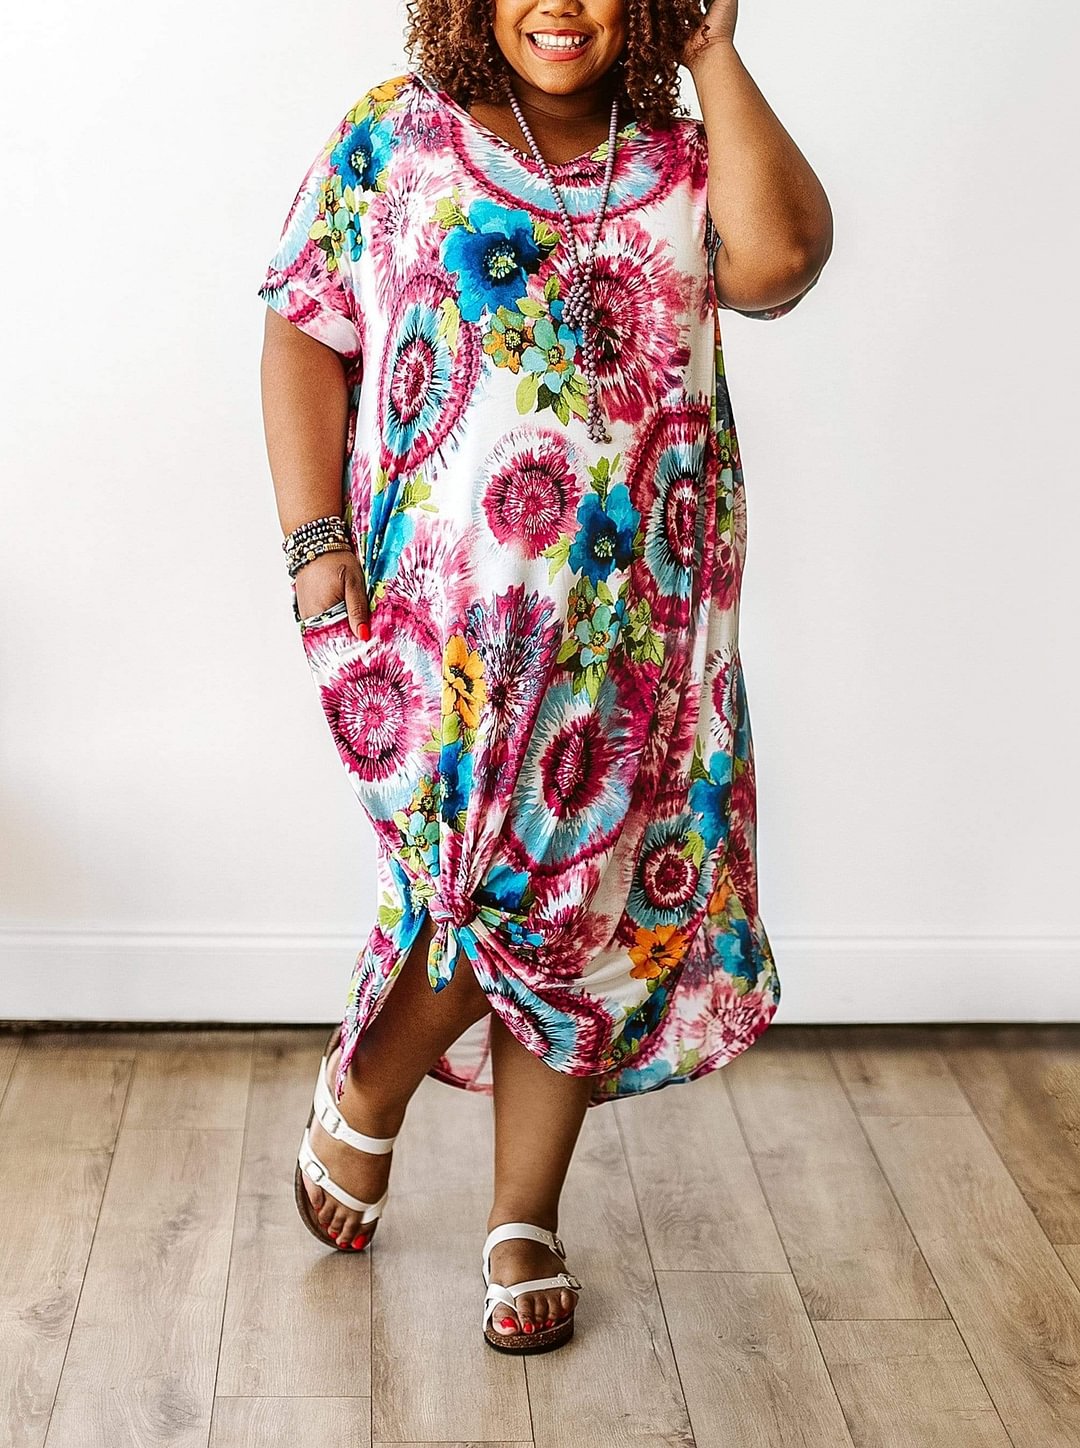 The Real Thing Dress | Cute Plus Size Dress